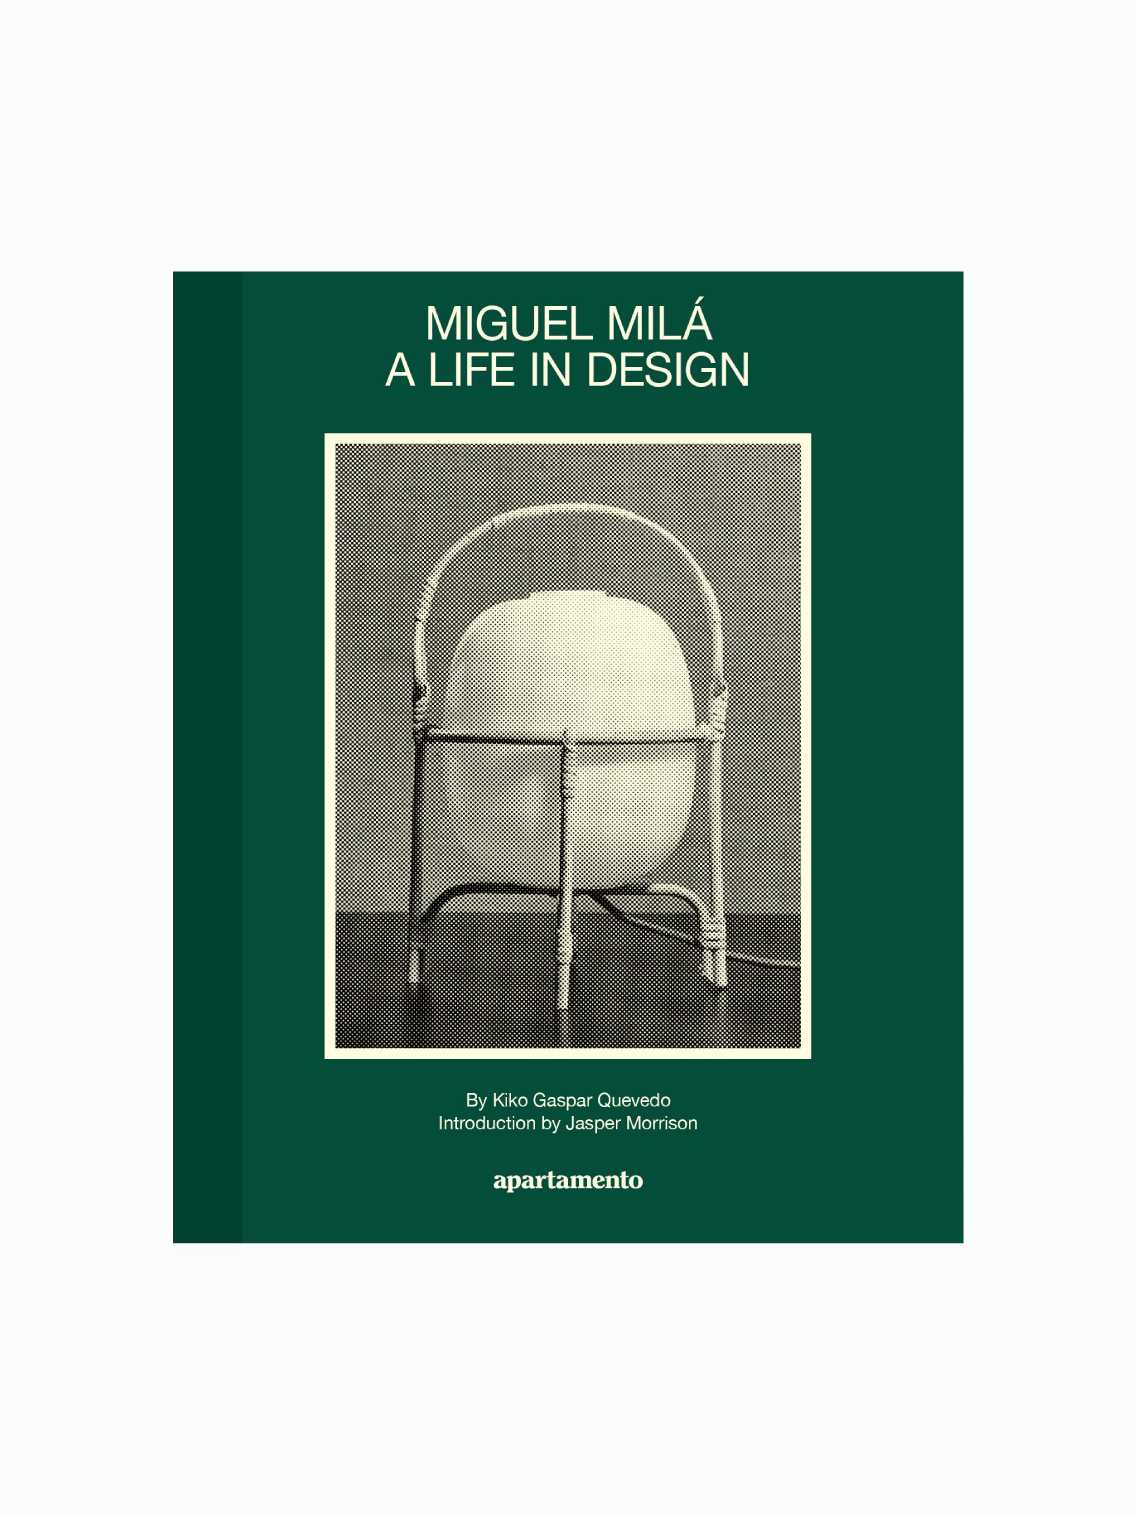 The book cover for the Apartamento "Miguel Milá: A Life in Design" features an avant-garde chair design by Milá against a green background. Written by Kiko Gaspar Quaredo with an introduction by Jasper Morrison, it is available at select stores like Barcelona's Bassalstore and published by Apartamento.